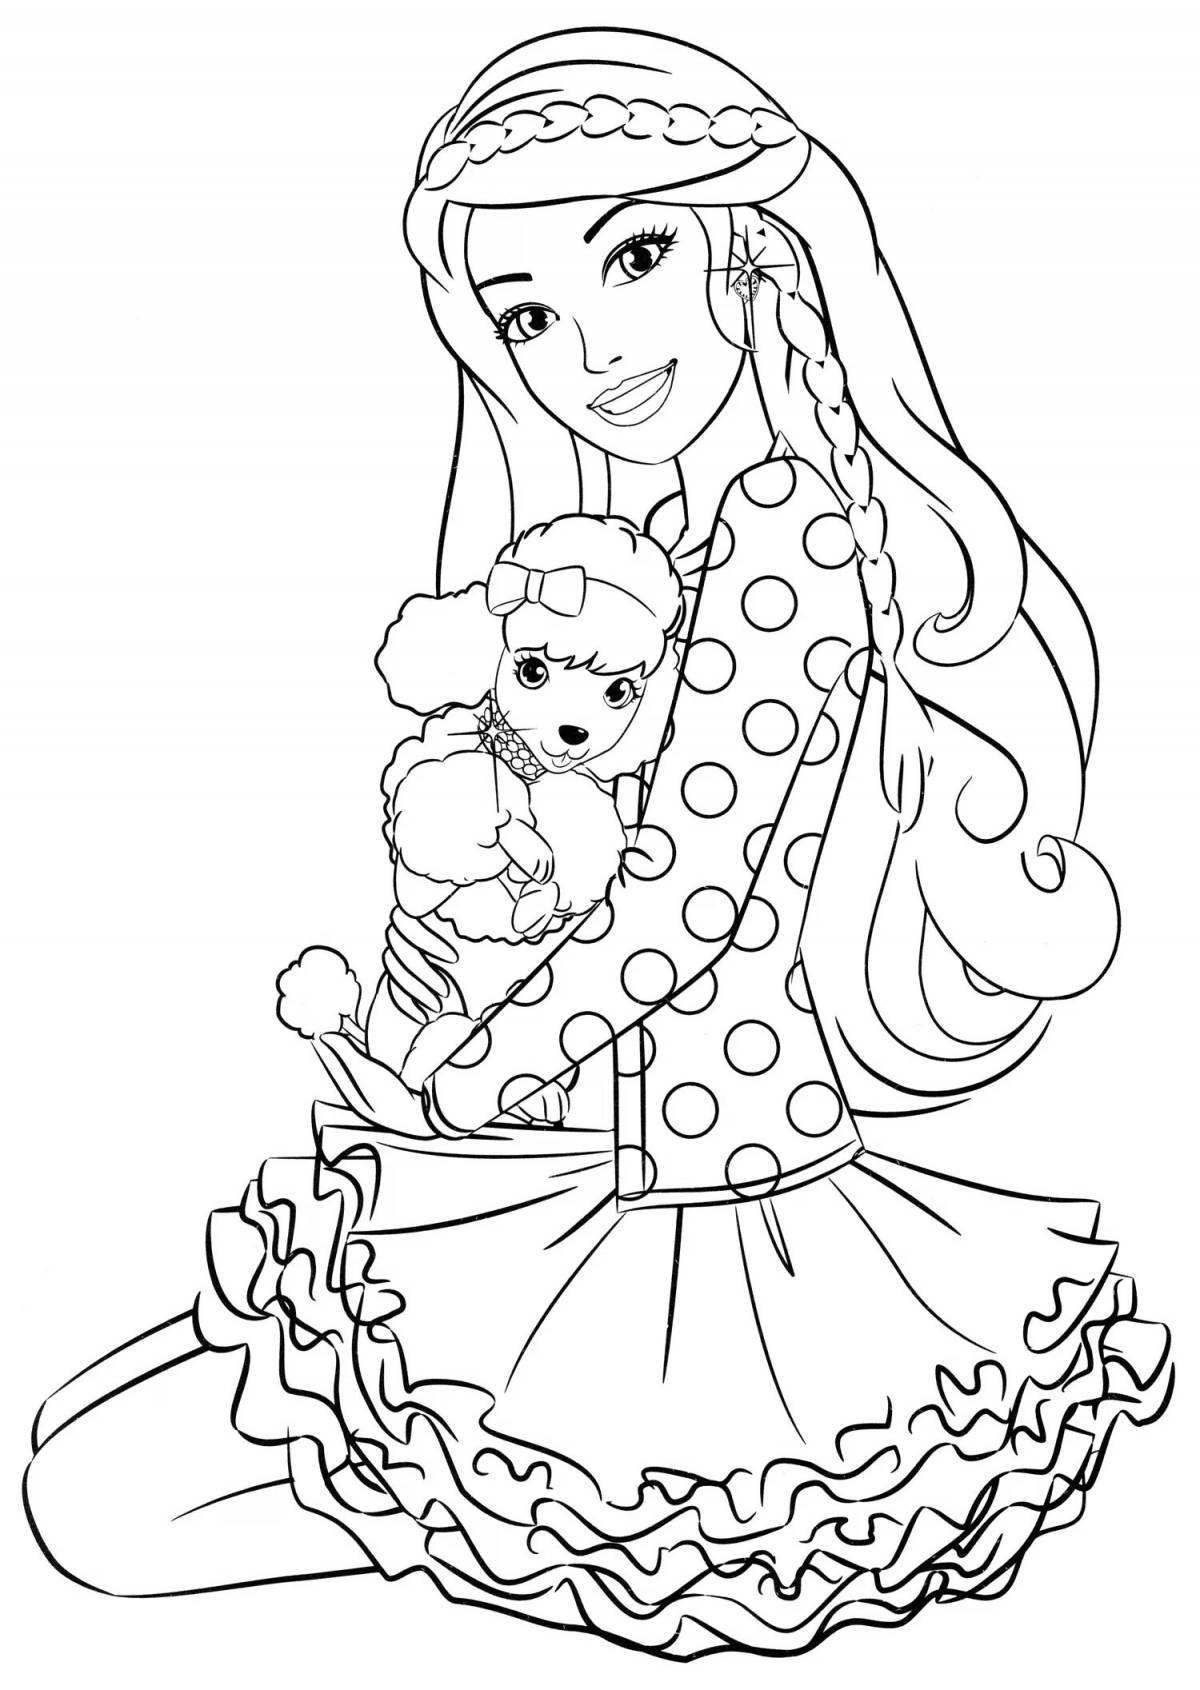 Charming barbie doll coloring book